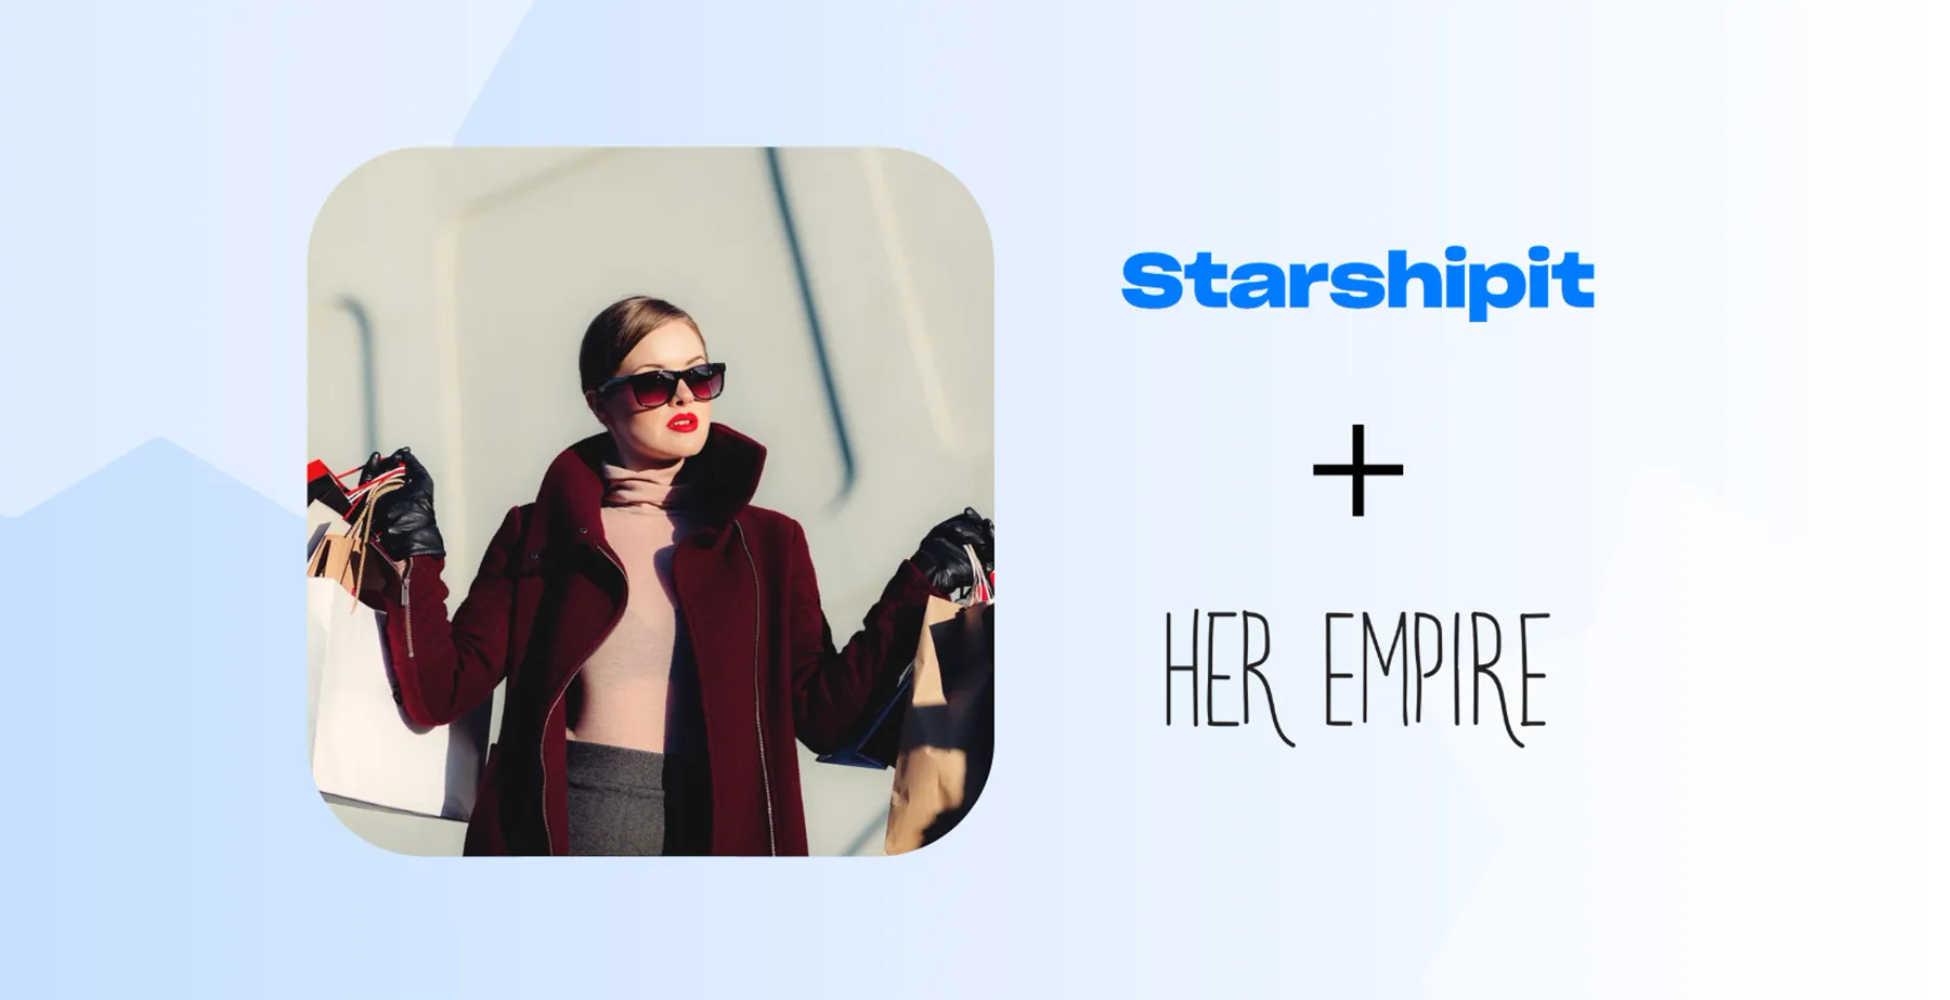 Starshipit and Her Empire case study